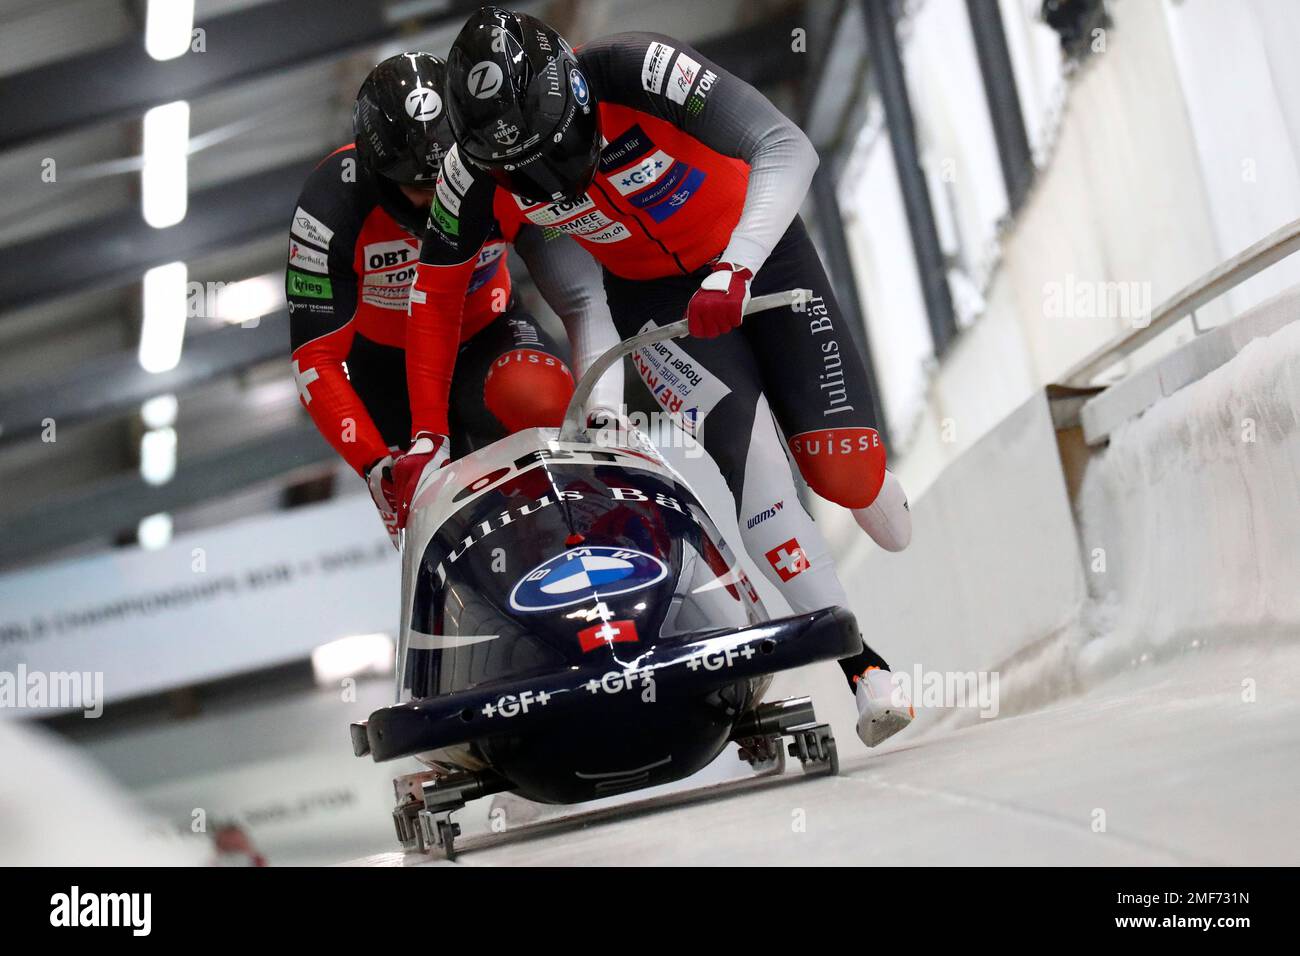 Michael Vogt and Sandro Michel of Switzerland start during the two mens bobsleigh race at the Bobsleigh and Skeleton World Championships in Altenberg, Germany, Saturday, Feb